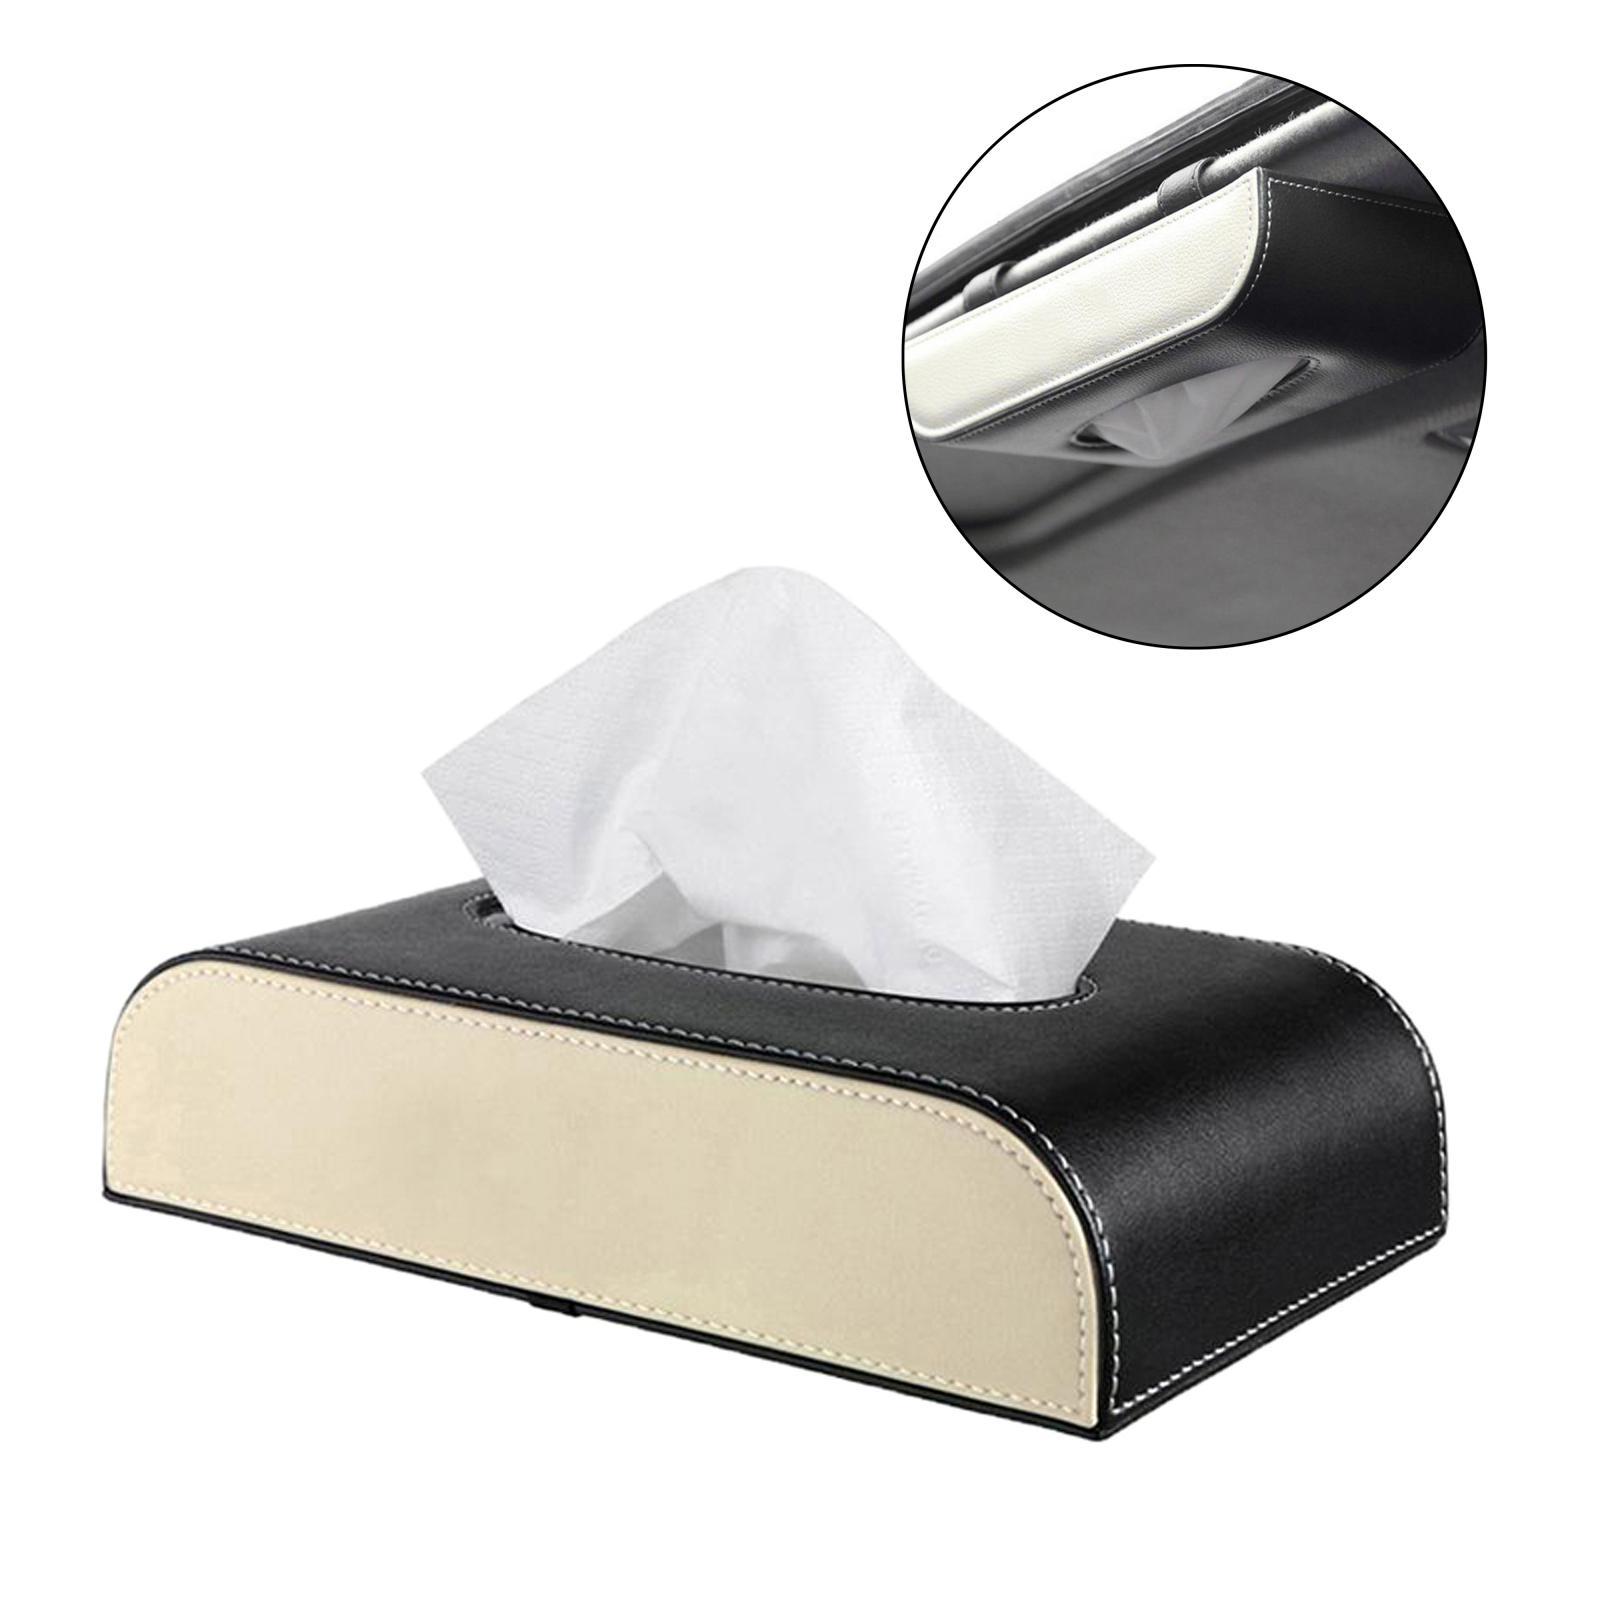 Auto PU Leather Paper Towel Case Tissue Box Paper Storage for Home Office Black Beige